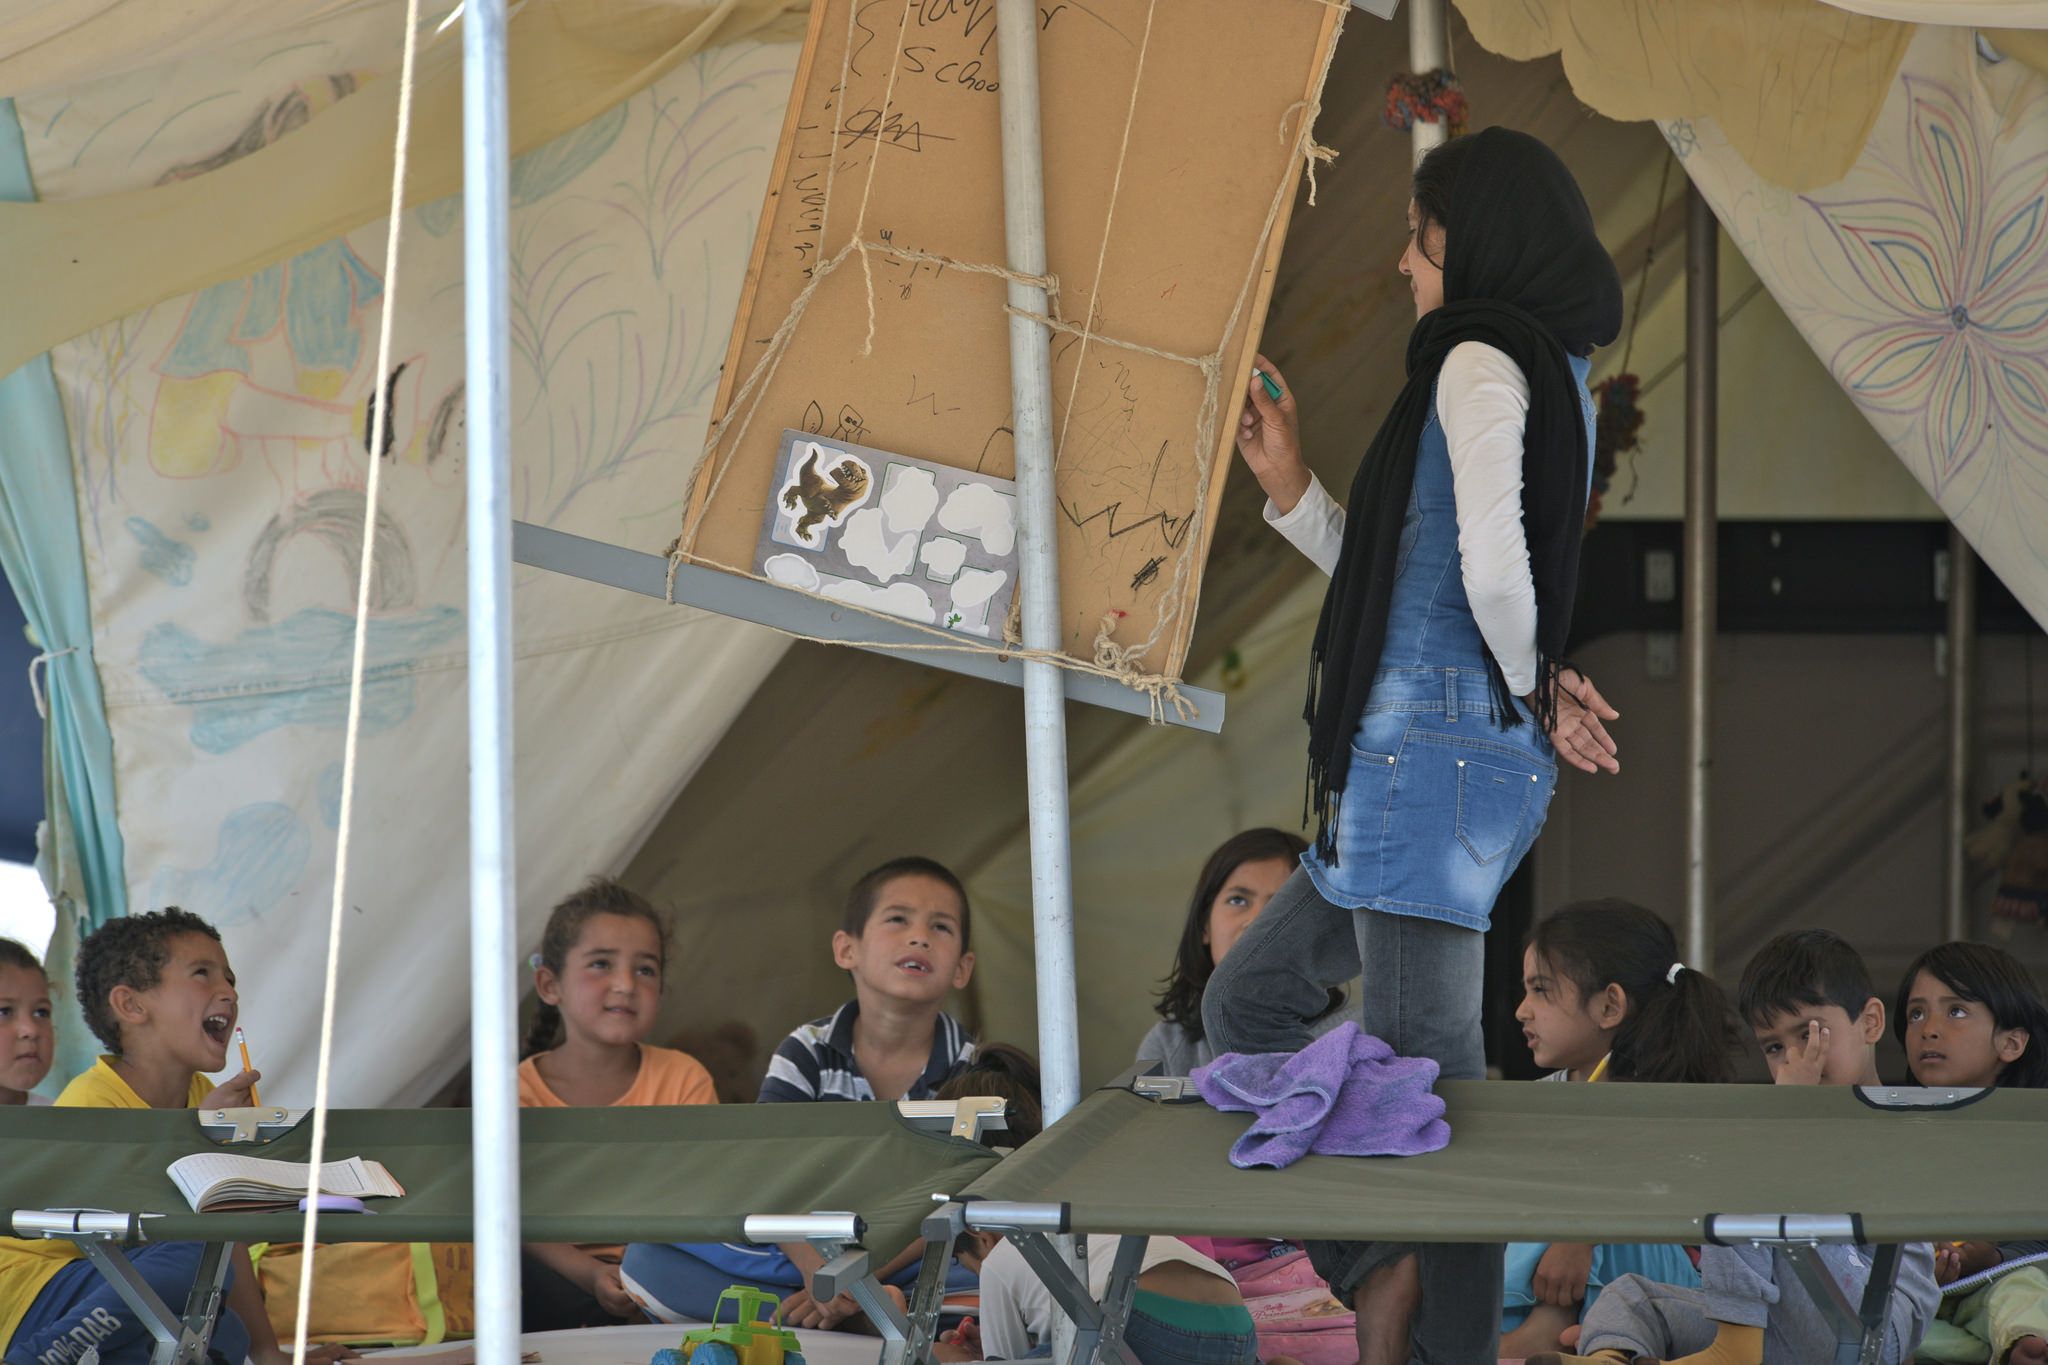 Some of the residents held make-shift educational sessions for children living in the camp. The only book they had is a Arabic-German language textbook, which was ferried over mountains and seas from Afghanistan by one of the camp residents. Image by Frederick Atax. Greece, 2016.